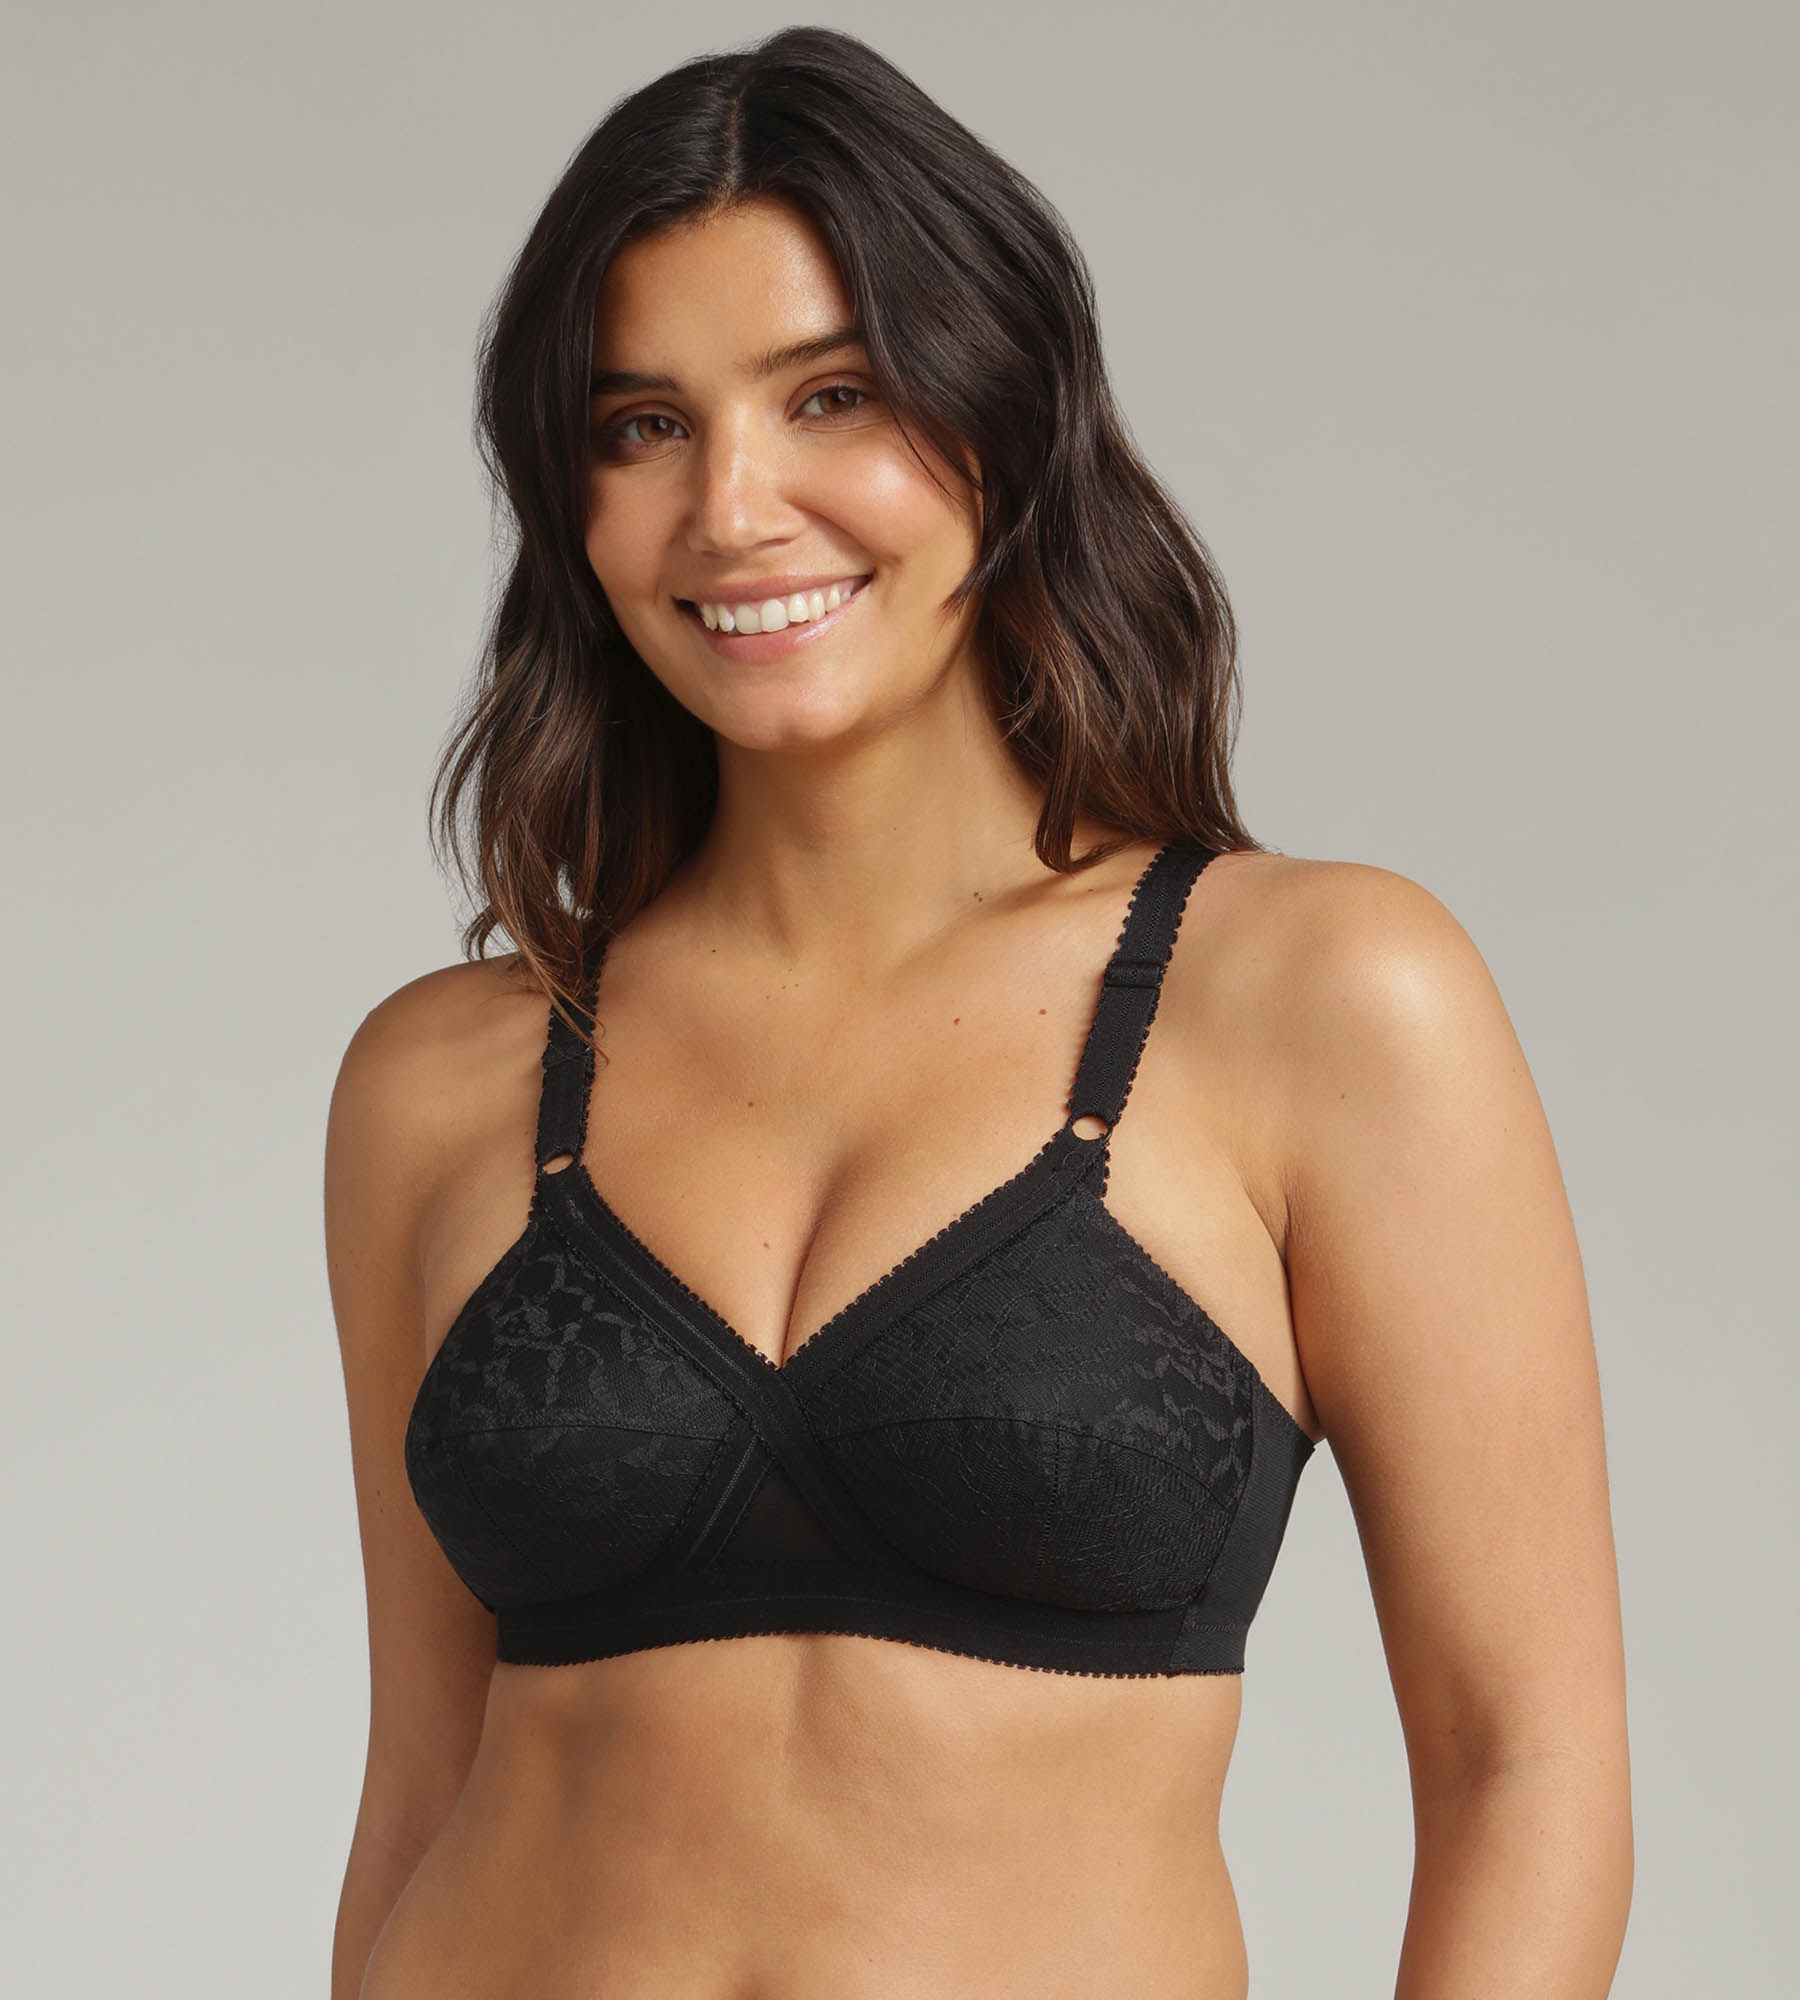 Non-wired bra in black Cross Your Heart 556, , PLAYTEX